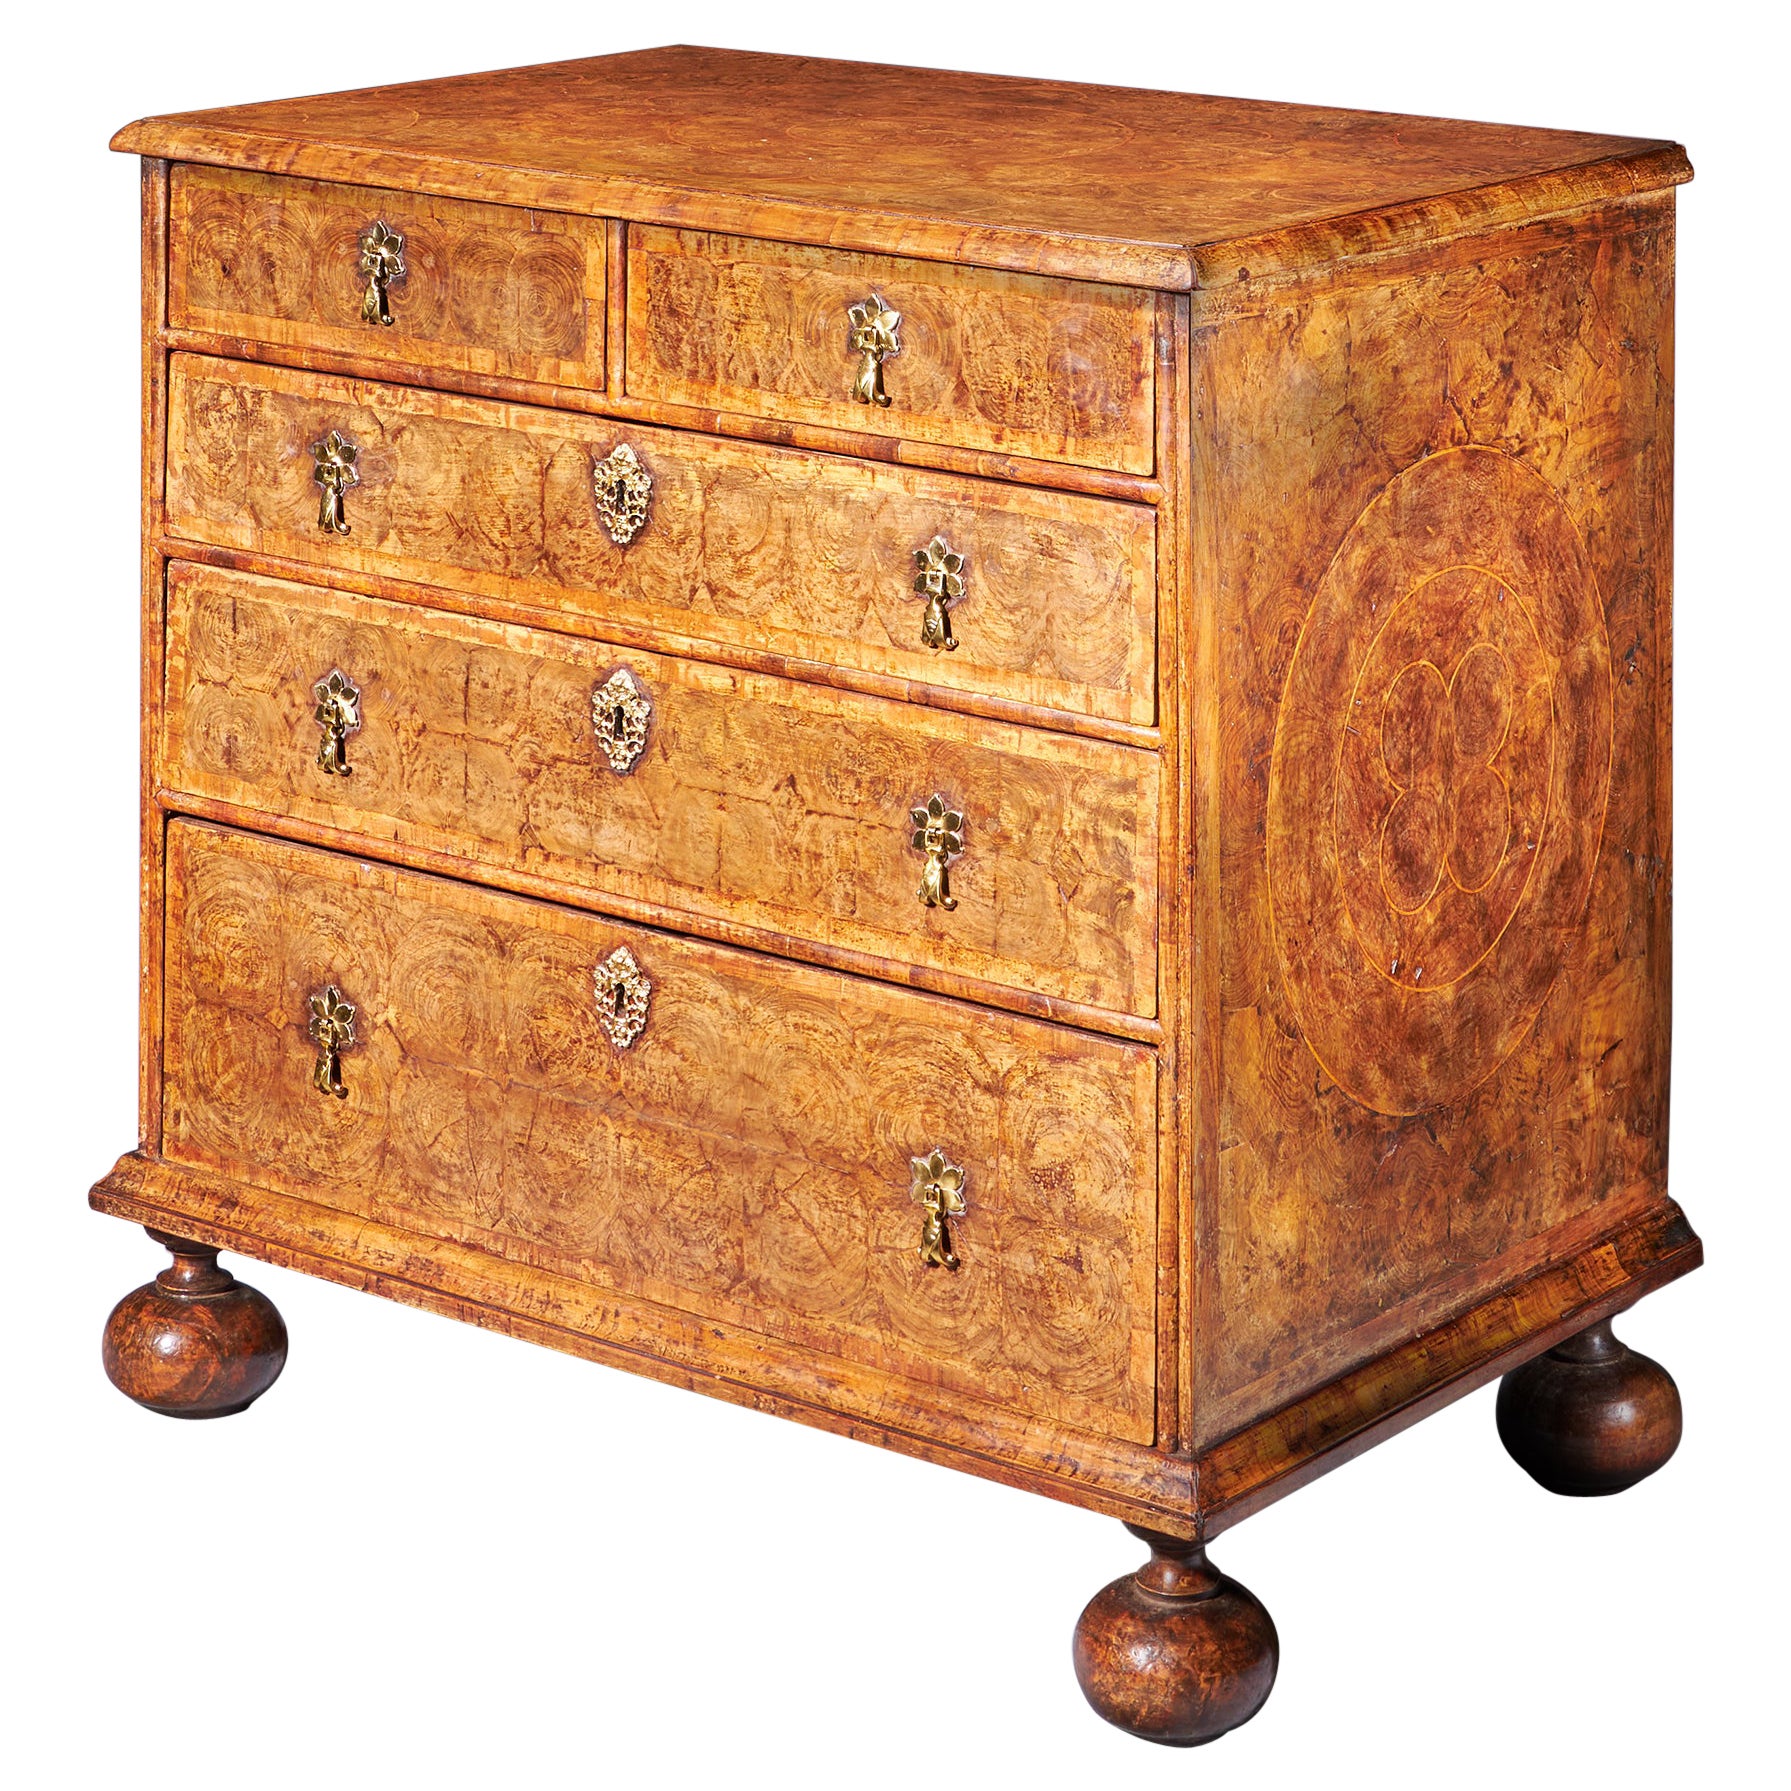 A Fine 17th Century Charles II Olive Oyster Chest, Circa 1680 England For Sale